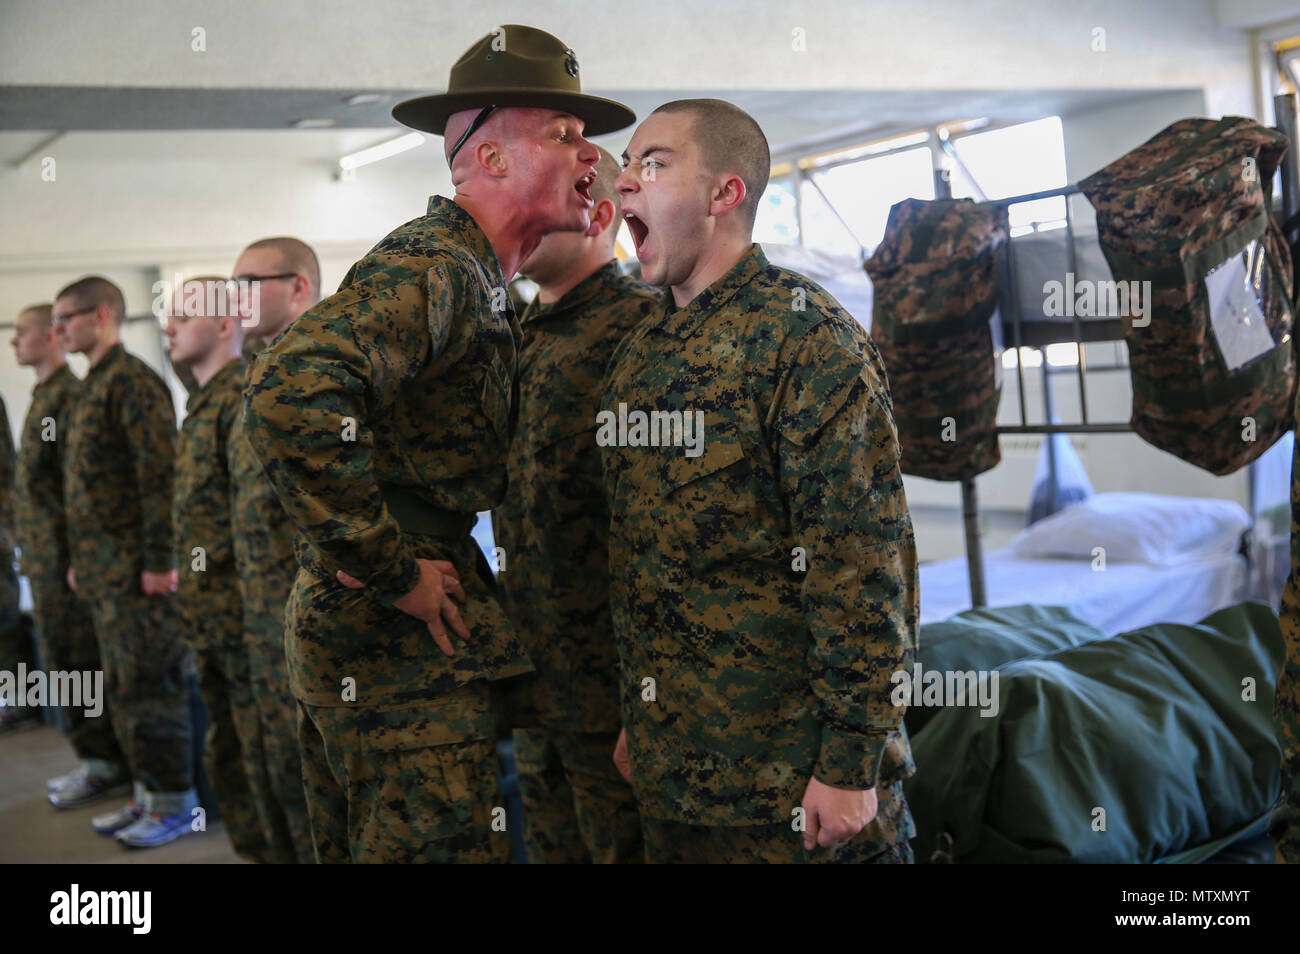 A drill instructor with Kilo Company, 3rd Recruit Training Battalion, instructs a recruit to respond louder during pick up at Marine Corps Recruit Depot San Diego, Jan. 27. The recruits will spend pick up with their drill instructors learning the rules and regulations of recruit training, regarding everything from how to act in the squad bay to how to speak to drill instructors. Annually, more than 17,000 males recruited from the Western Recruiting Region are trained at MCRD San Diego. Kilo Company is scheduled to graduate April 21. Stock Photo